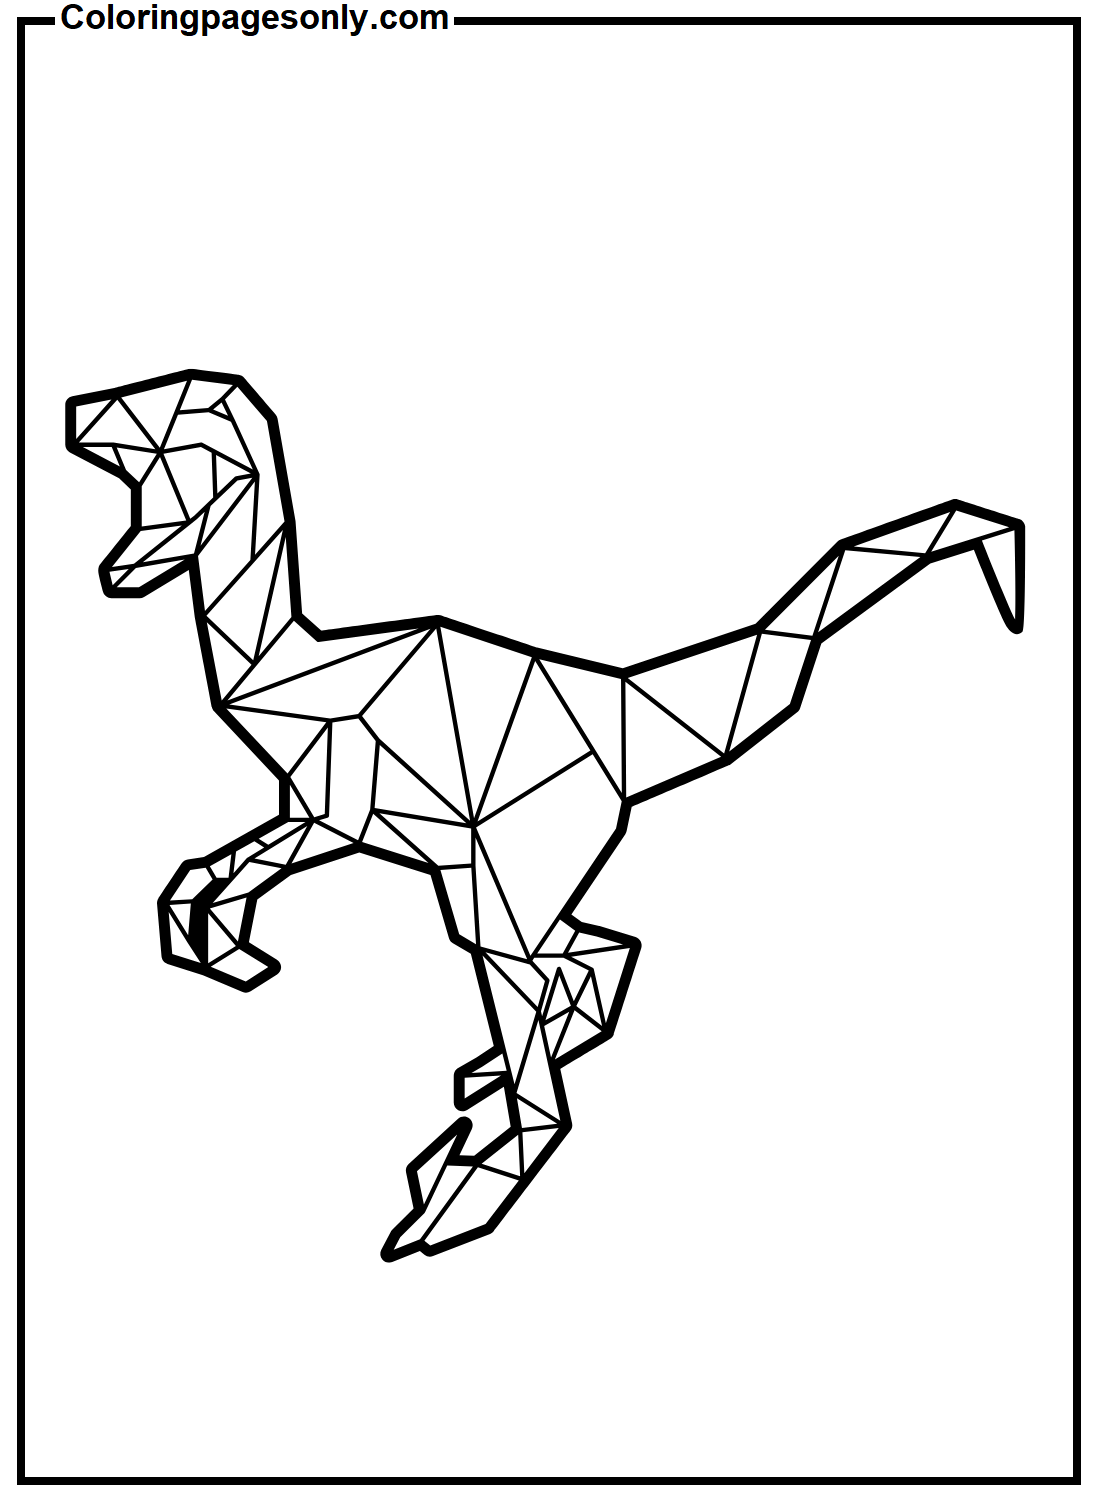 Polygonal Velociraptor Coloring Pages